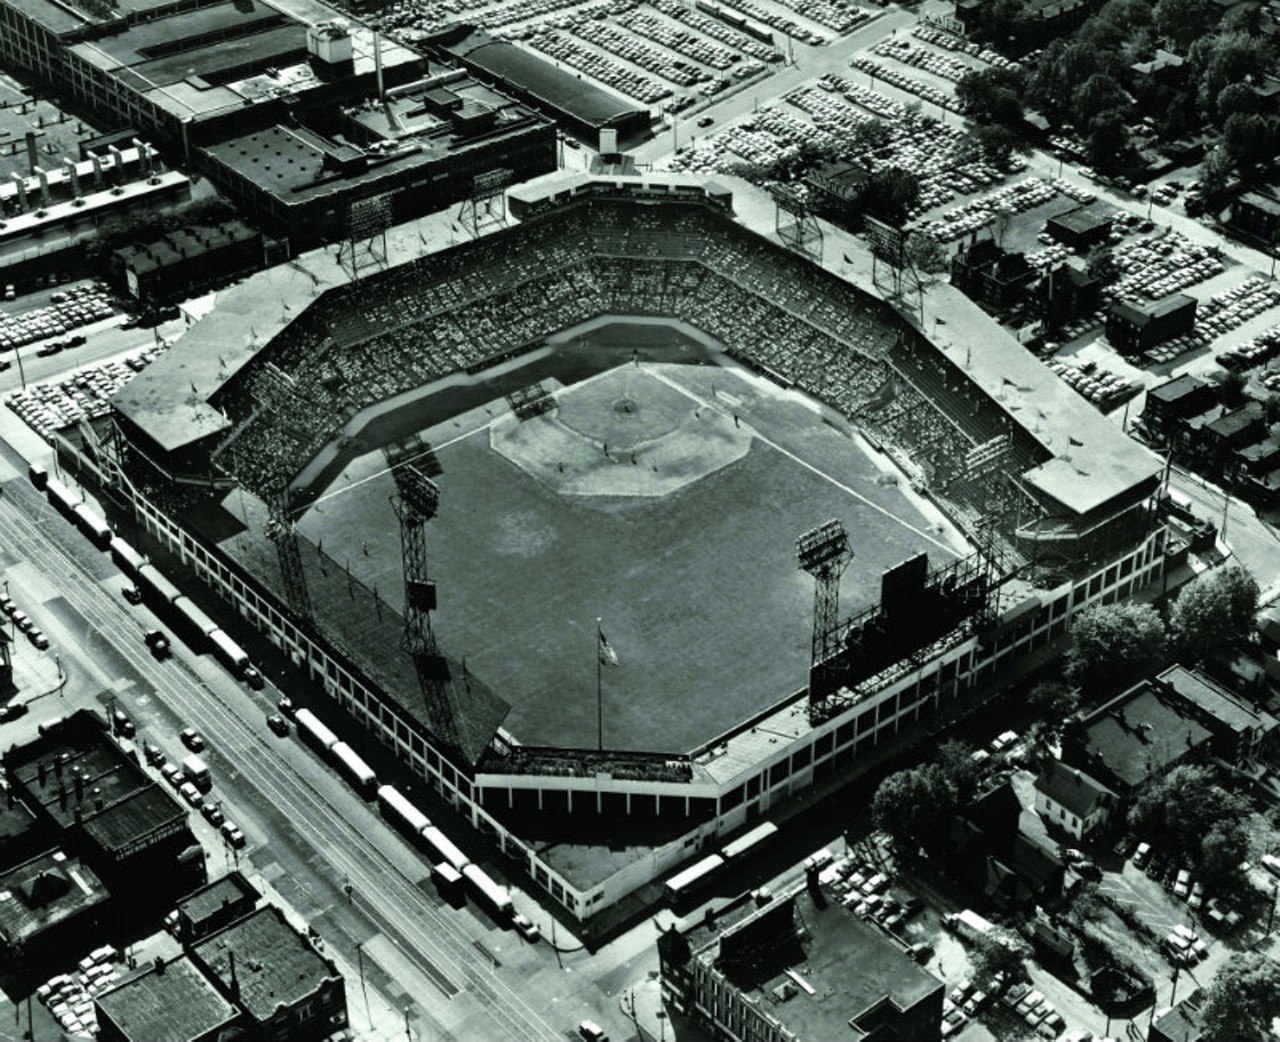 Cheer on the Cardinals at Sportsman's Park.Sportsman&#146;s Park, which once stood at the corner of North Grand and Dodier Street in north St. Louis, recalls as much baseball history as any ballpark in history. With decades of diamond memories from the St. Louis Browns and St. Louis Cardinals, the importance of Sportsman&#146;s Park in the history of St. Louis cannot be underestimated. It&#146;s where the Cardinals and Browns faced off in the 1944 World Series, where Stan Musial once hit five home runs in a double-header, where Enos Slaughter&#146;s &#147;Mad Dash&#148; won the 1946 World Series, where three-foot seven-inch Eddie Gaedel was sent in to pitch hit, and most significantly, it&#146;s where the St. Louis Cardinals won six World Series titles. Photo courtesy of the Missouri History Museum, St. Louis.